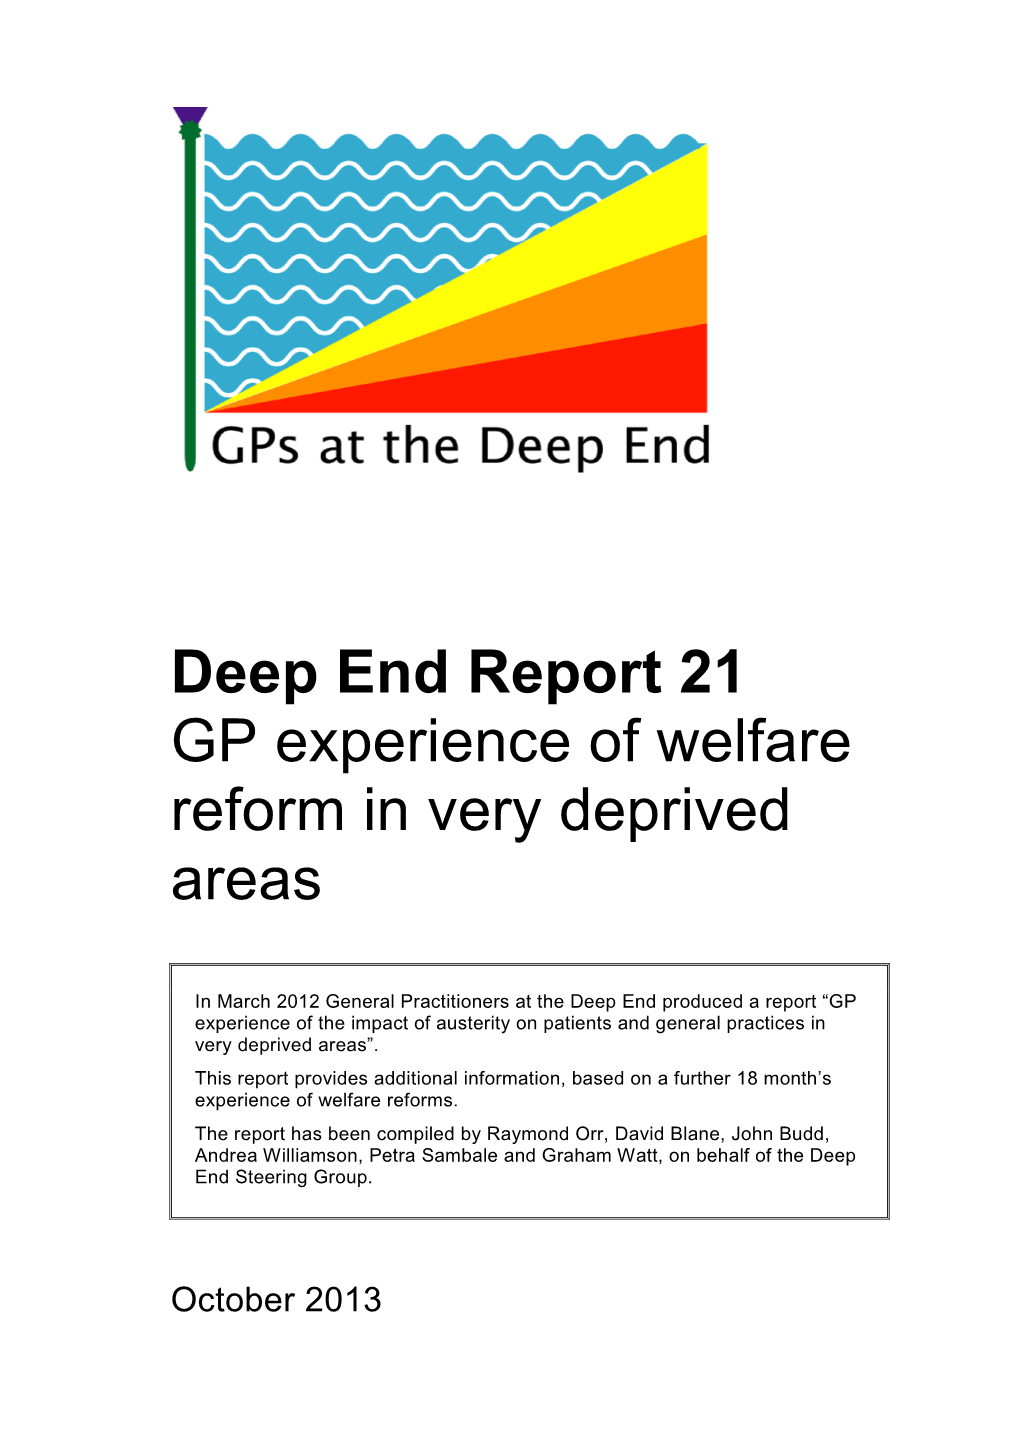 GP Experience of Welfare Reform in Very Deprived Areas